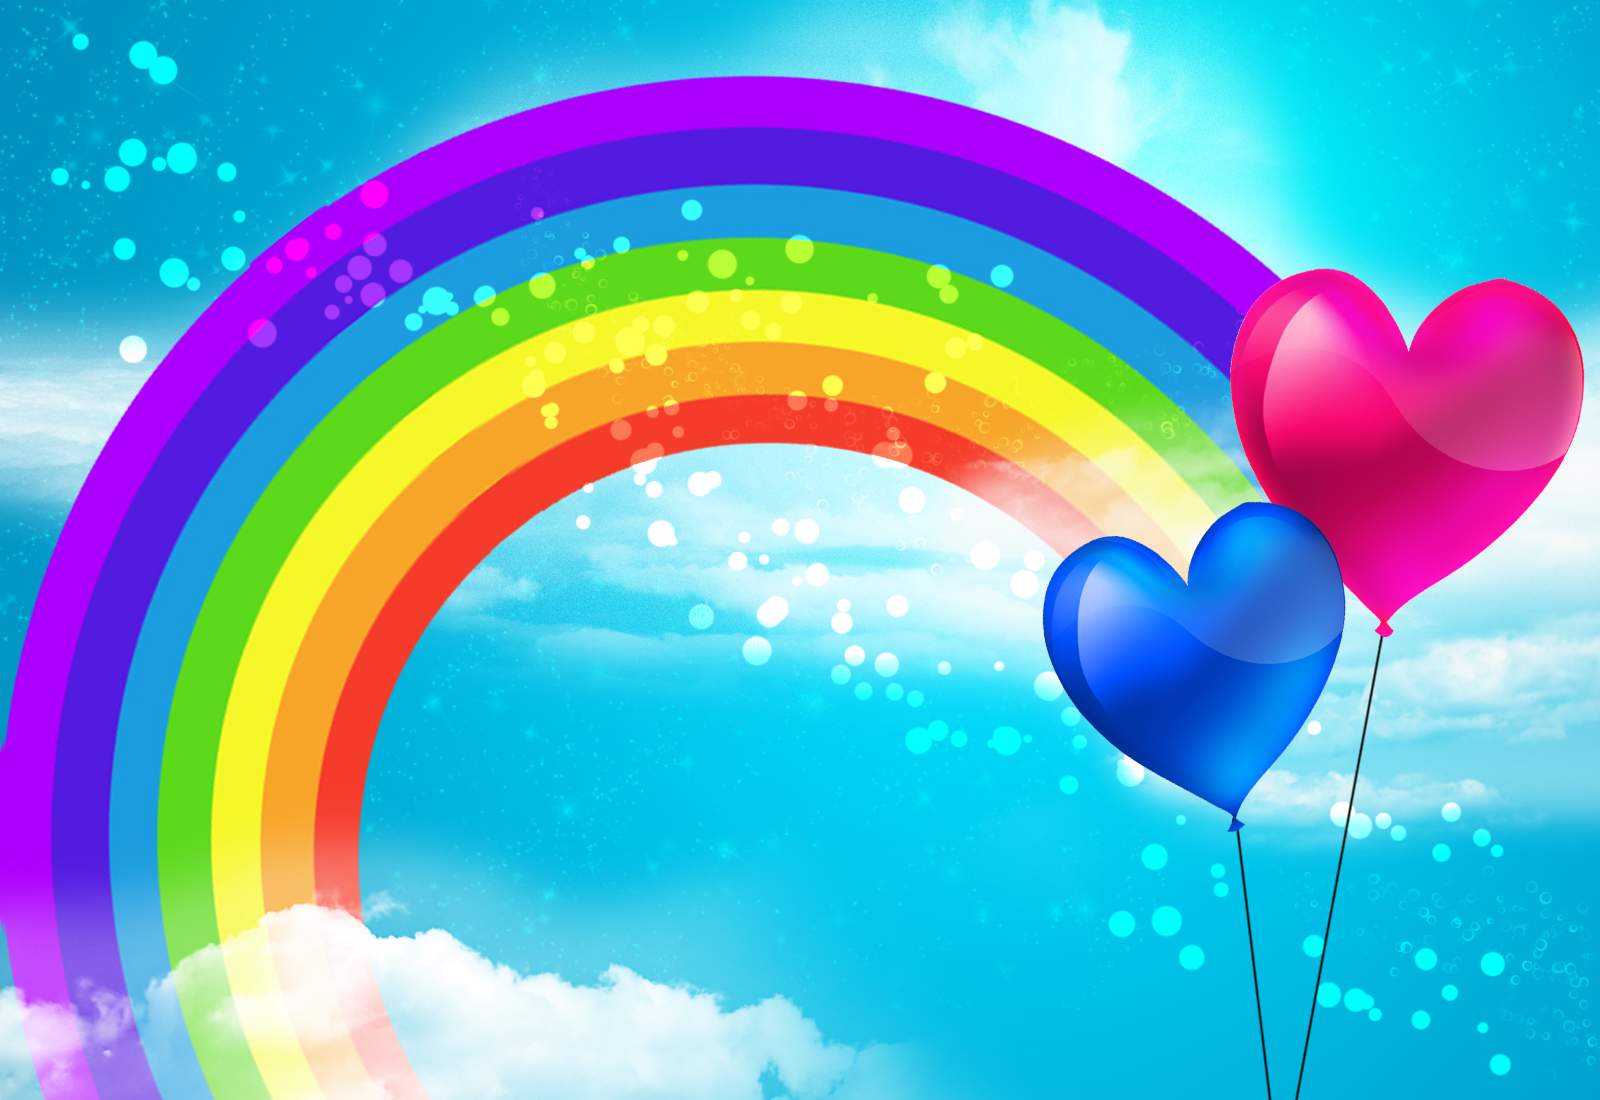 Rainbows Image Collection HD Wallpaper